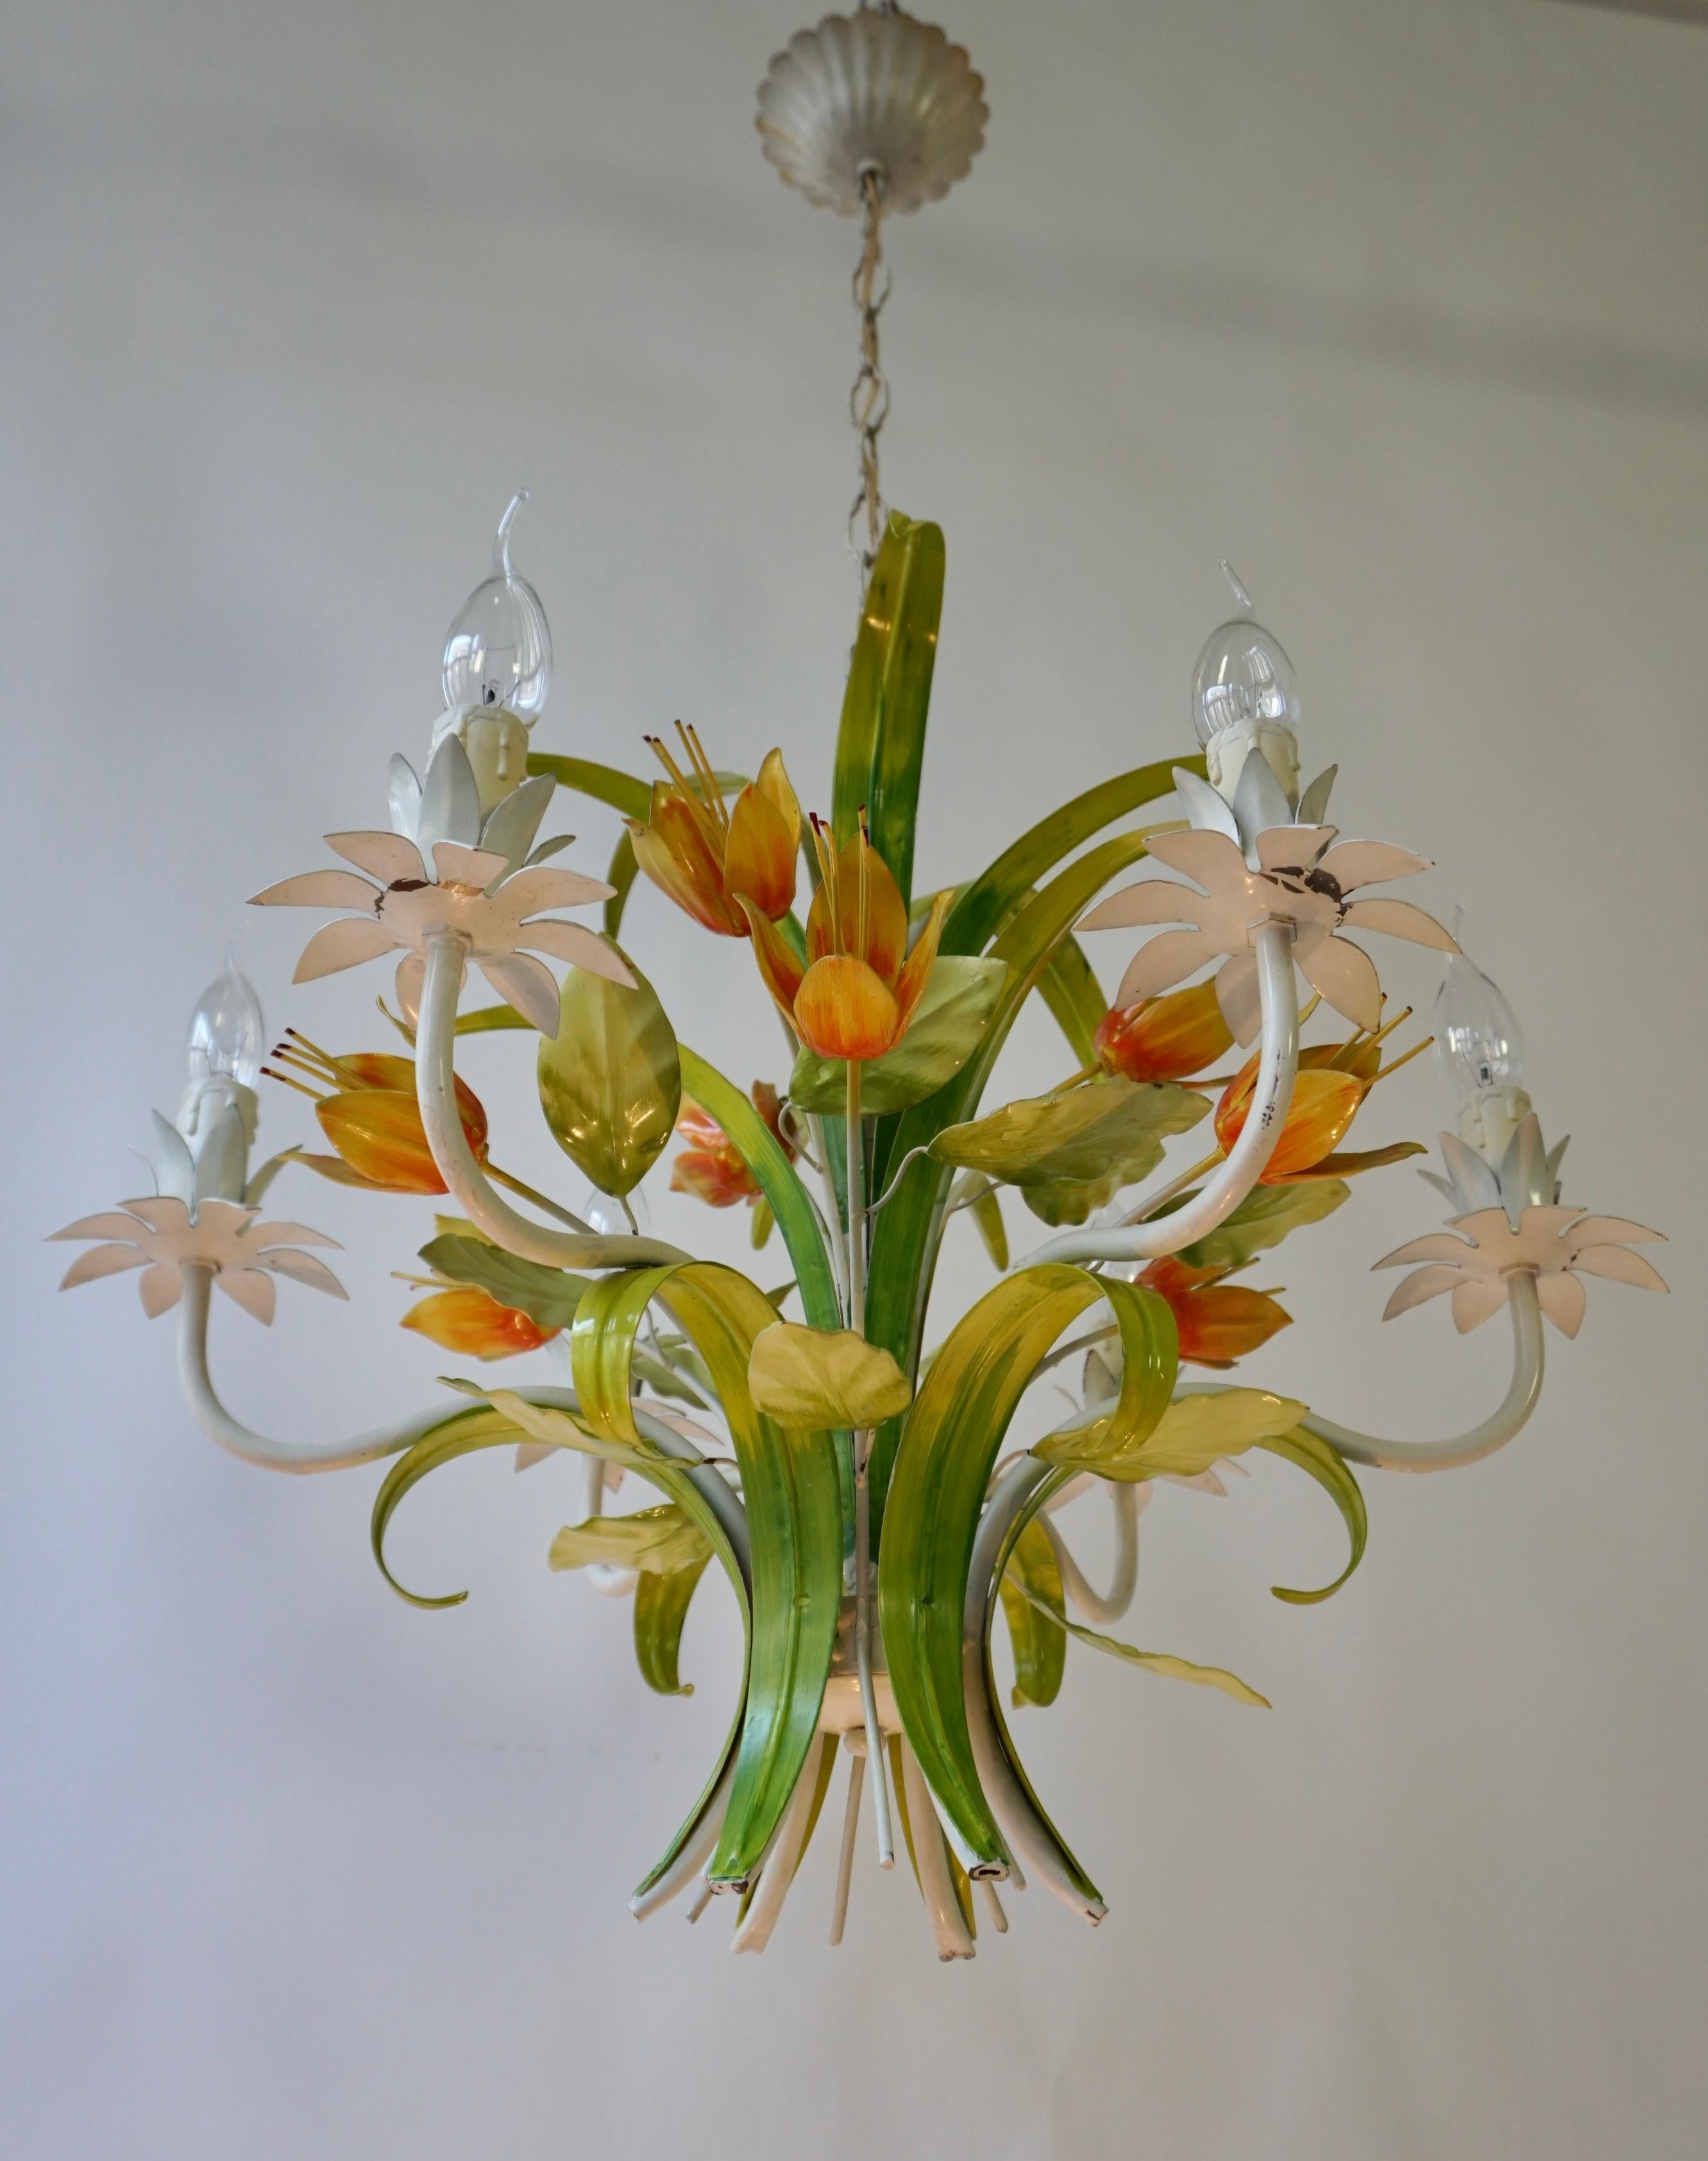 1960s Bright Boho Chic Italian Tole Painted Metal Chandelier With Floral Decor For Sale 4